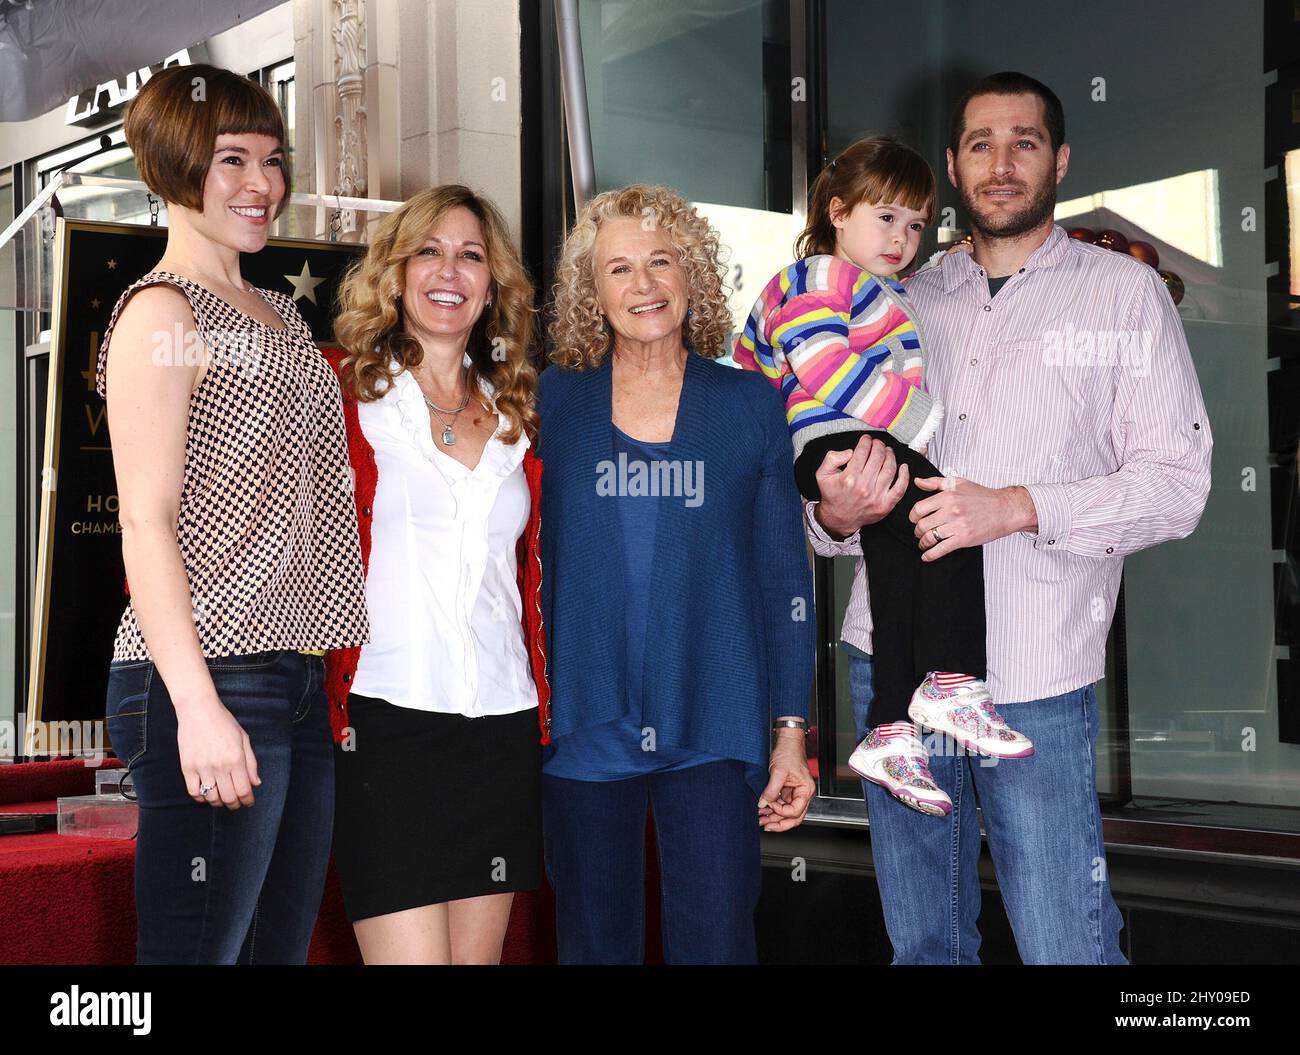 Carole King & Familie beim Walk of Fame Honors Carole King am Hollywood Blvd in Los Angeles, USA. Stockfoto